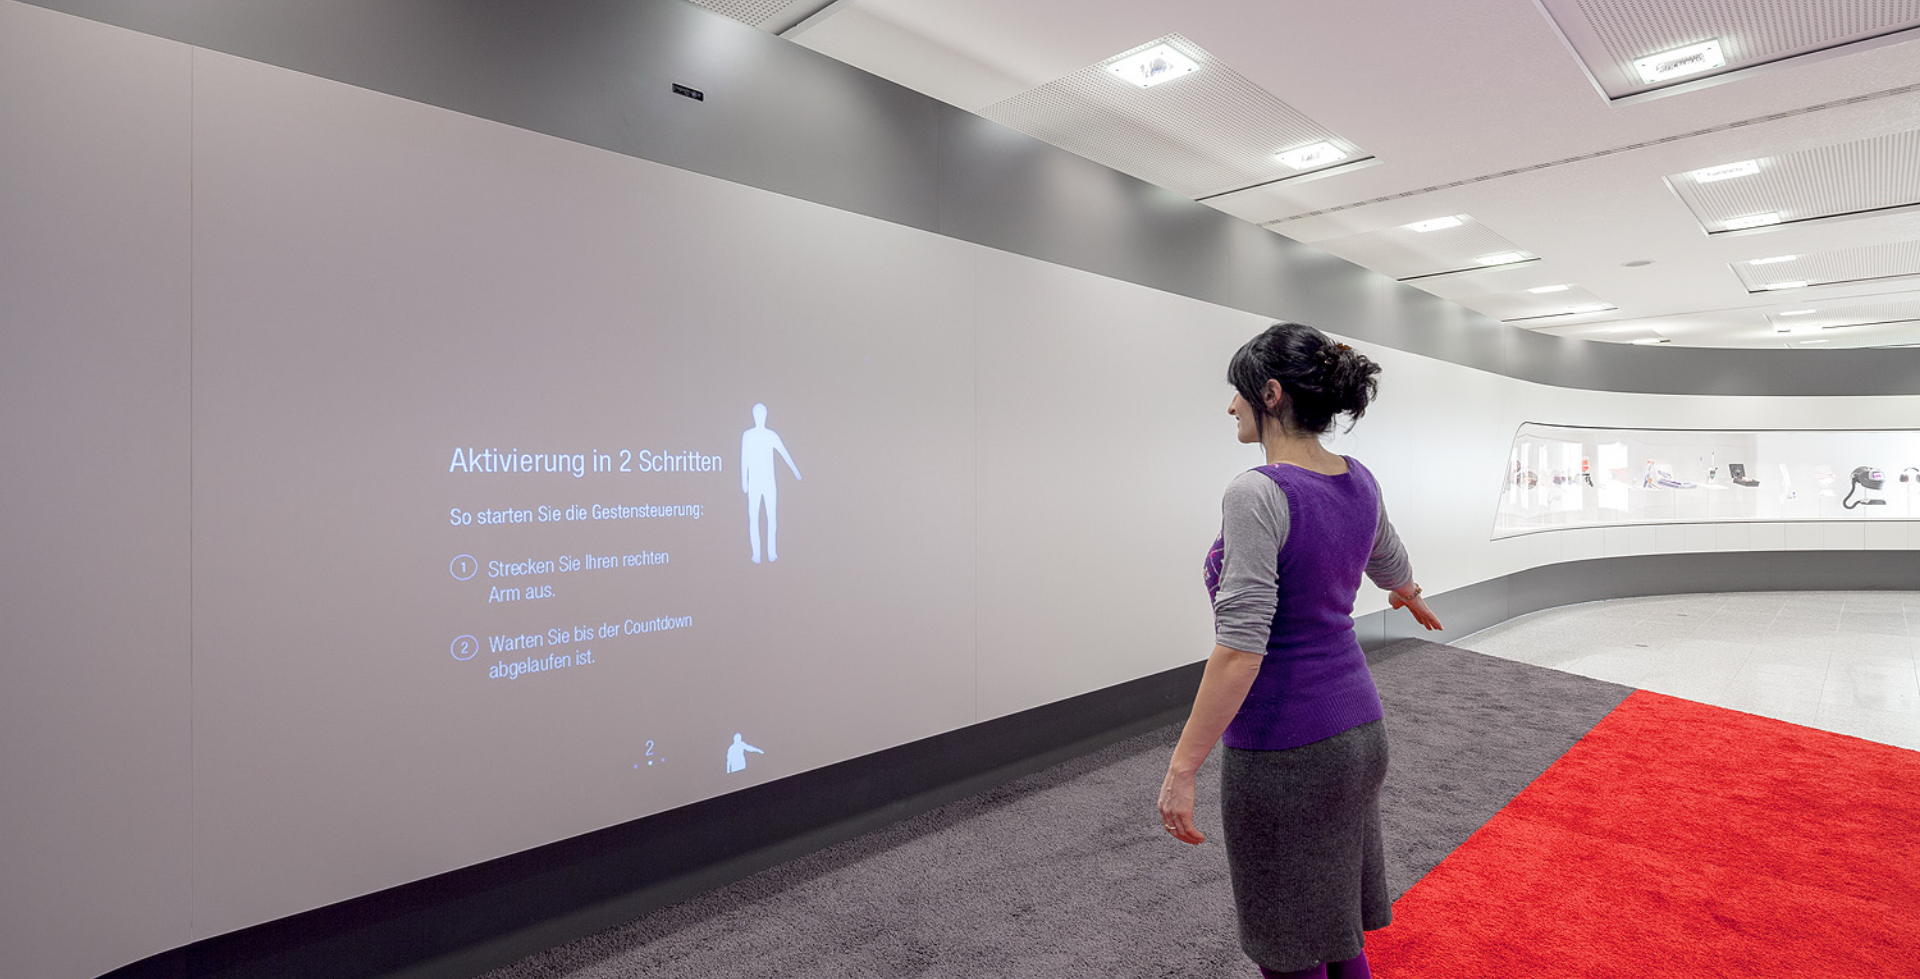 3M Deutschland Kinect Installation - Interactive Projection - realtime visions